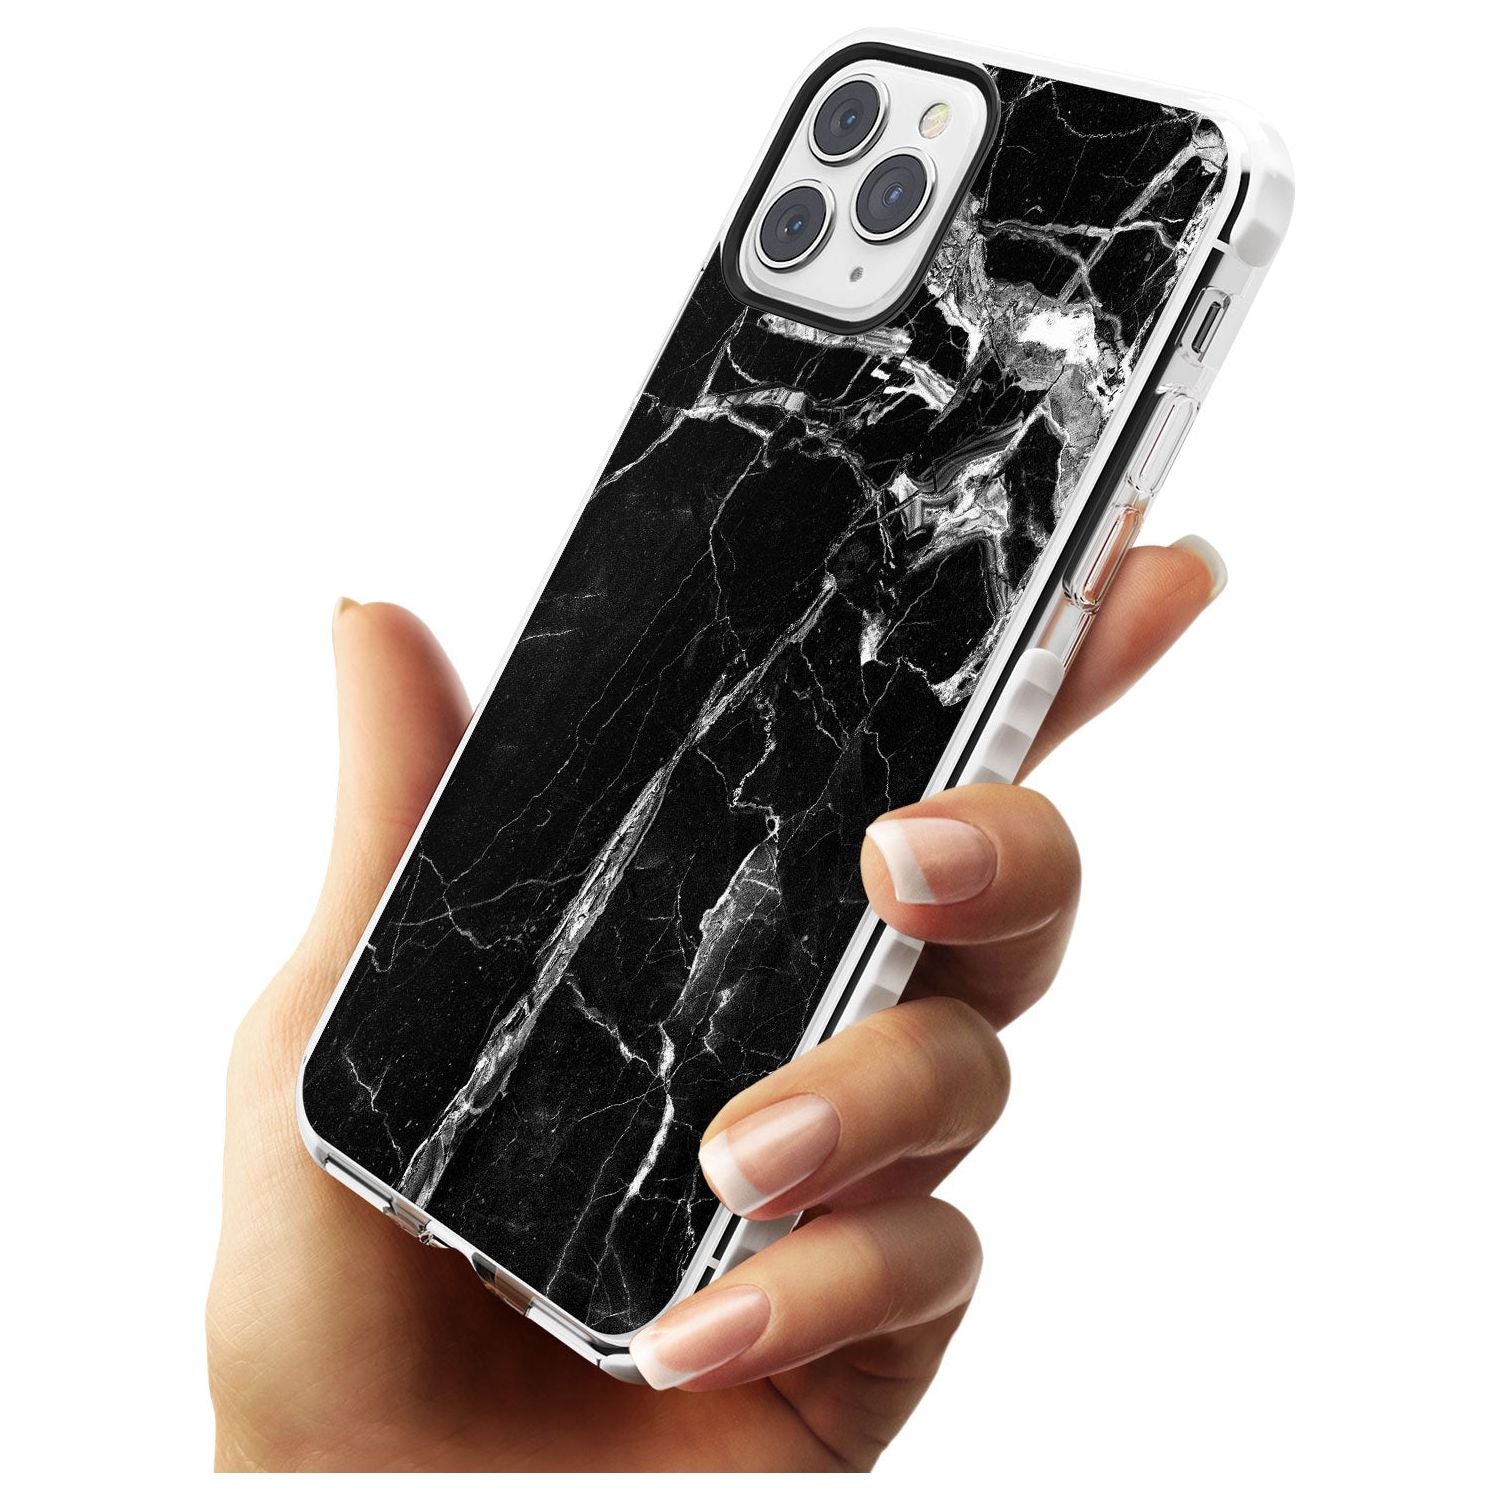 Black Onyx Marble Texture Slim TPU Phone Case for iPhone 11 Pro Max